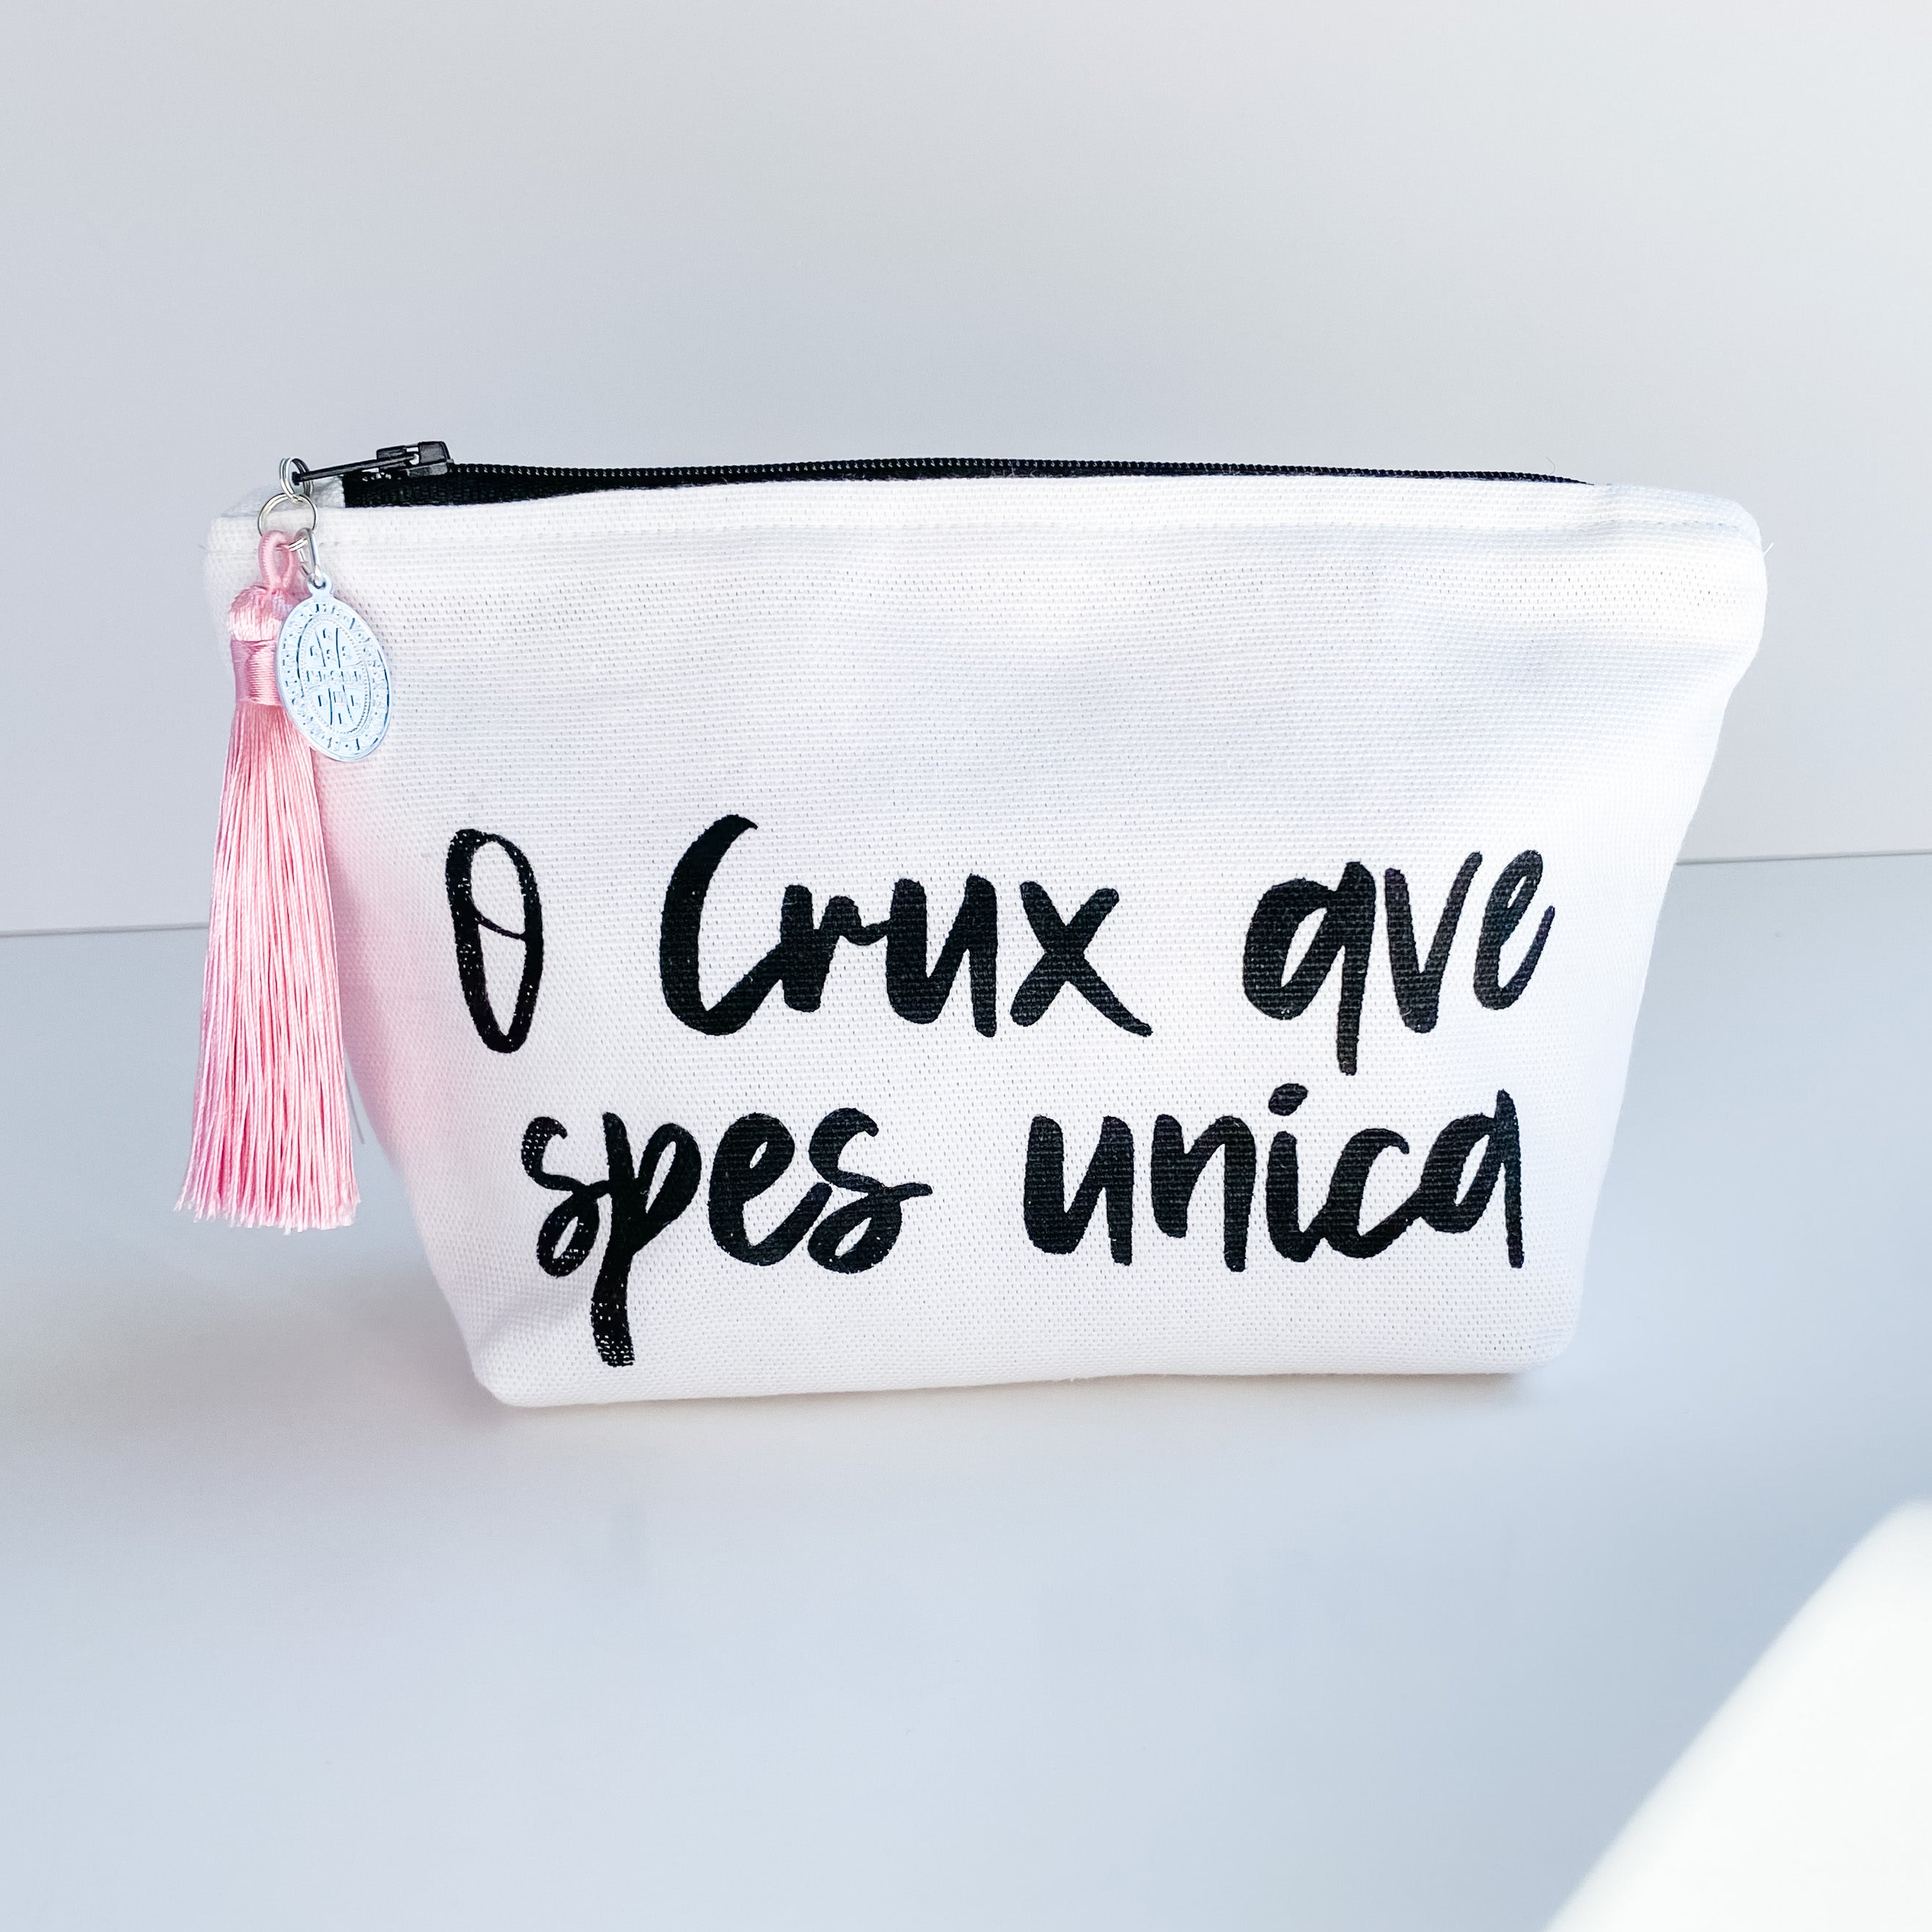 [DISCONTINUED] Tribulation Kit with "O Crux Ave" Zipper Pouch